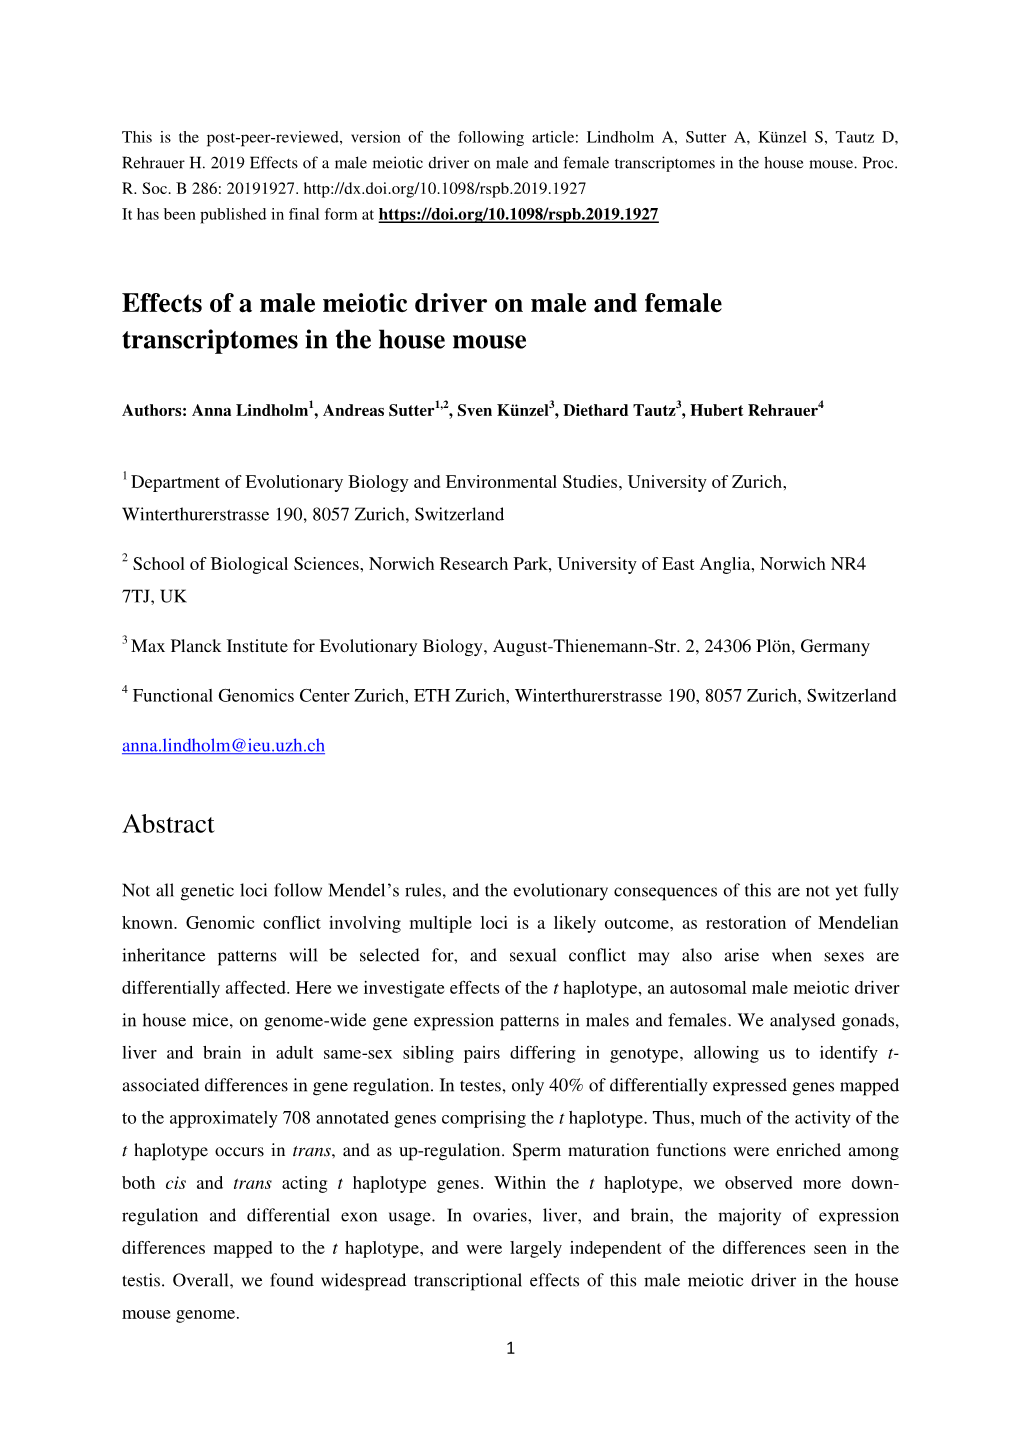 Effects of a Male Meiotic Driver on Male and Female Transcriptomes in the House Mouse Abstract